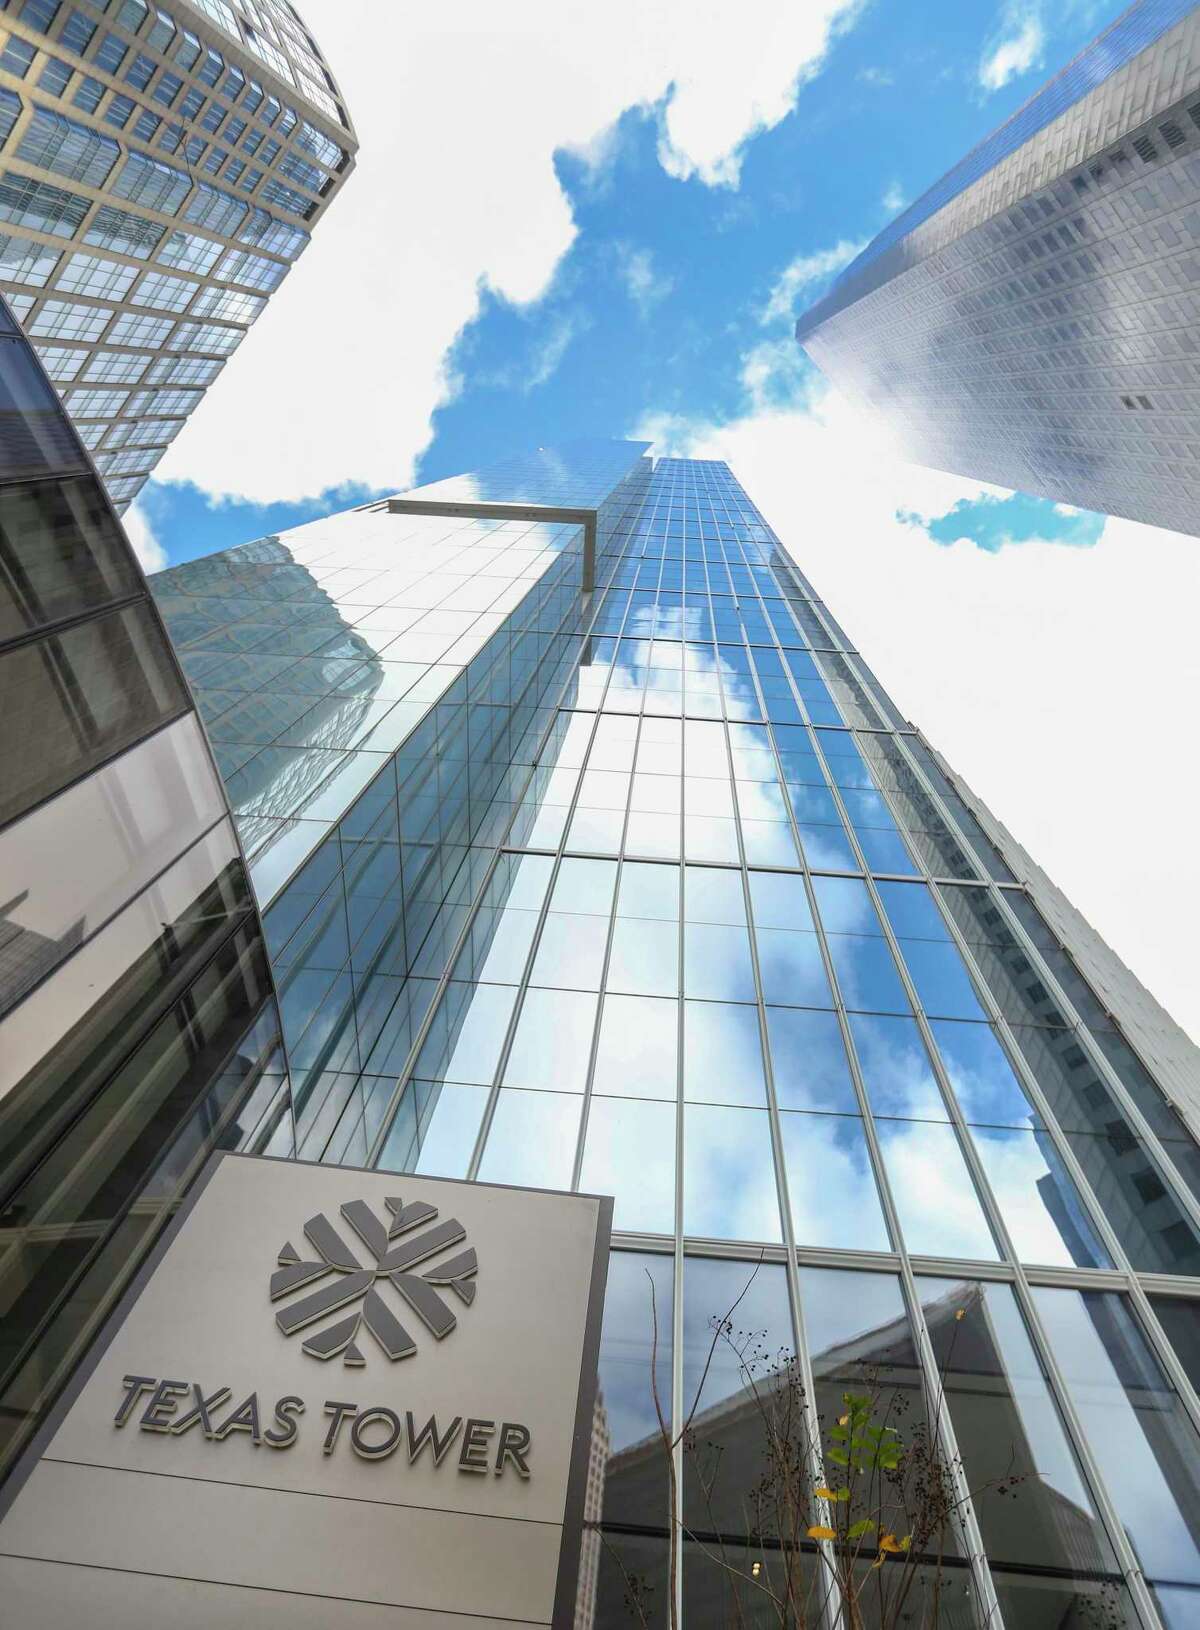 Cushman & Wakefield will open a downtown Houston office in Texas Tower in early 2023.